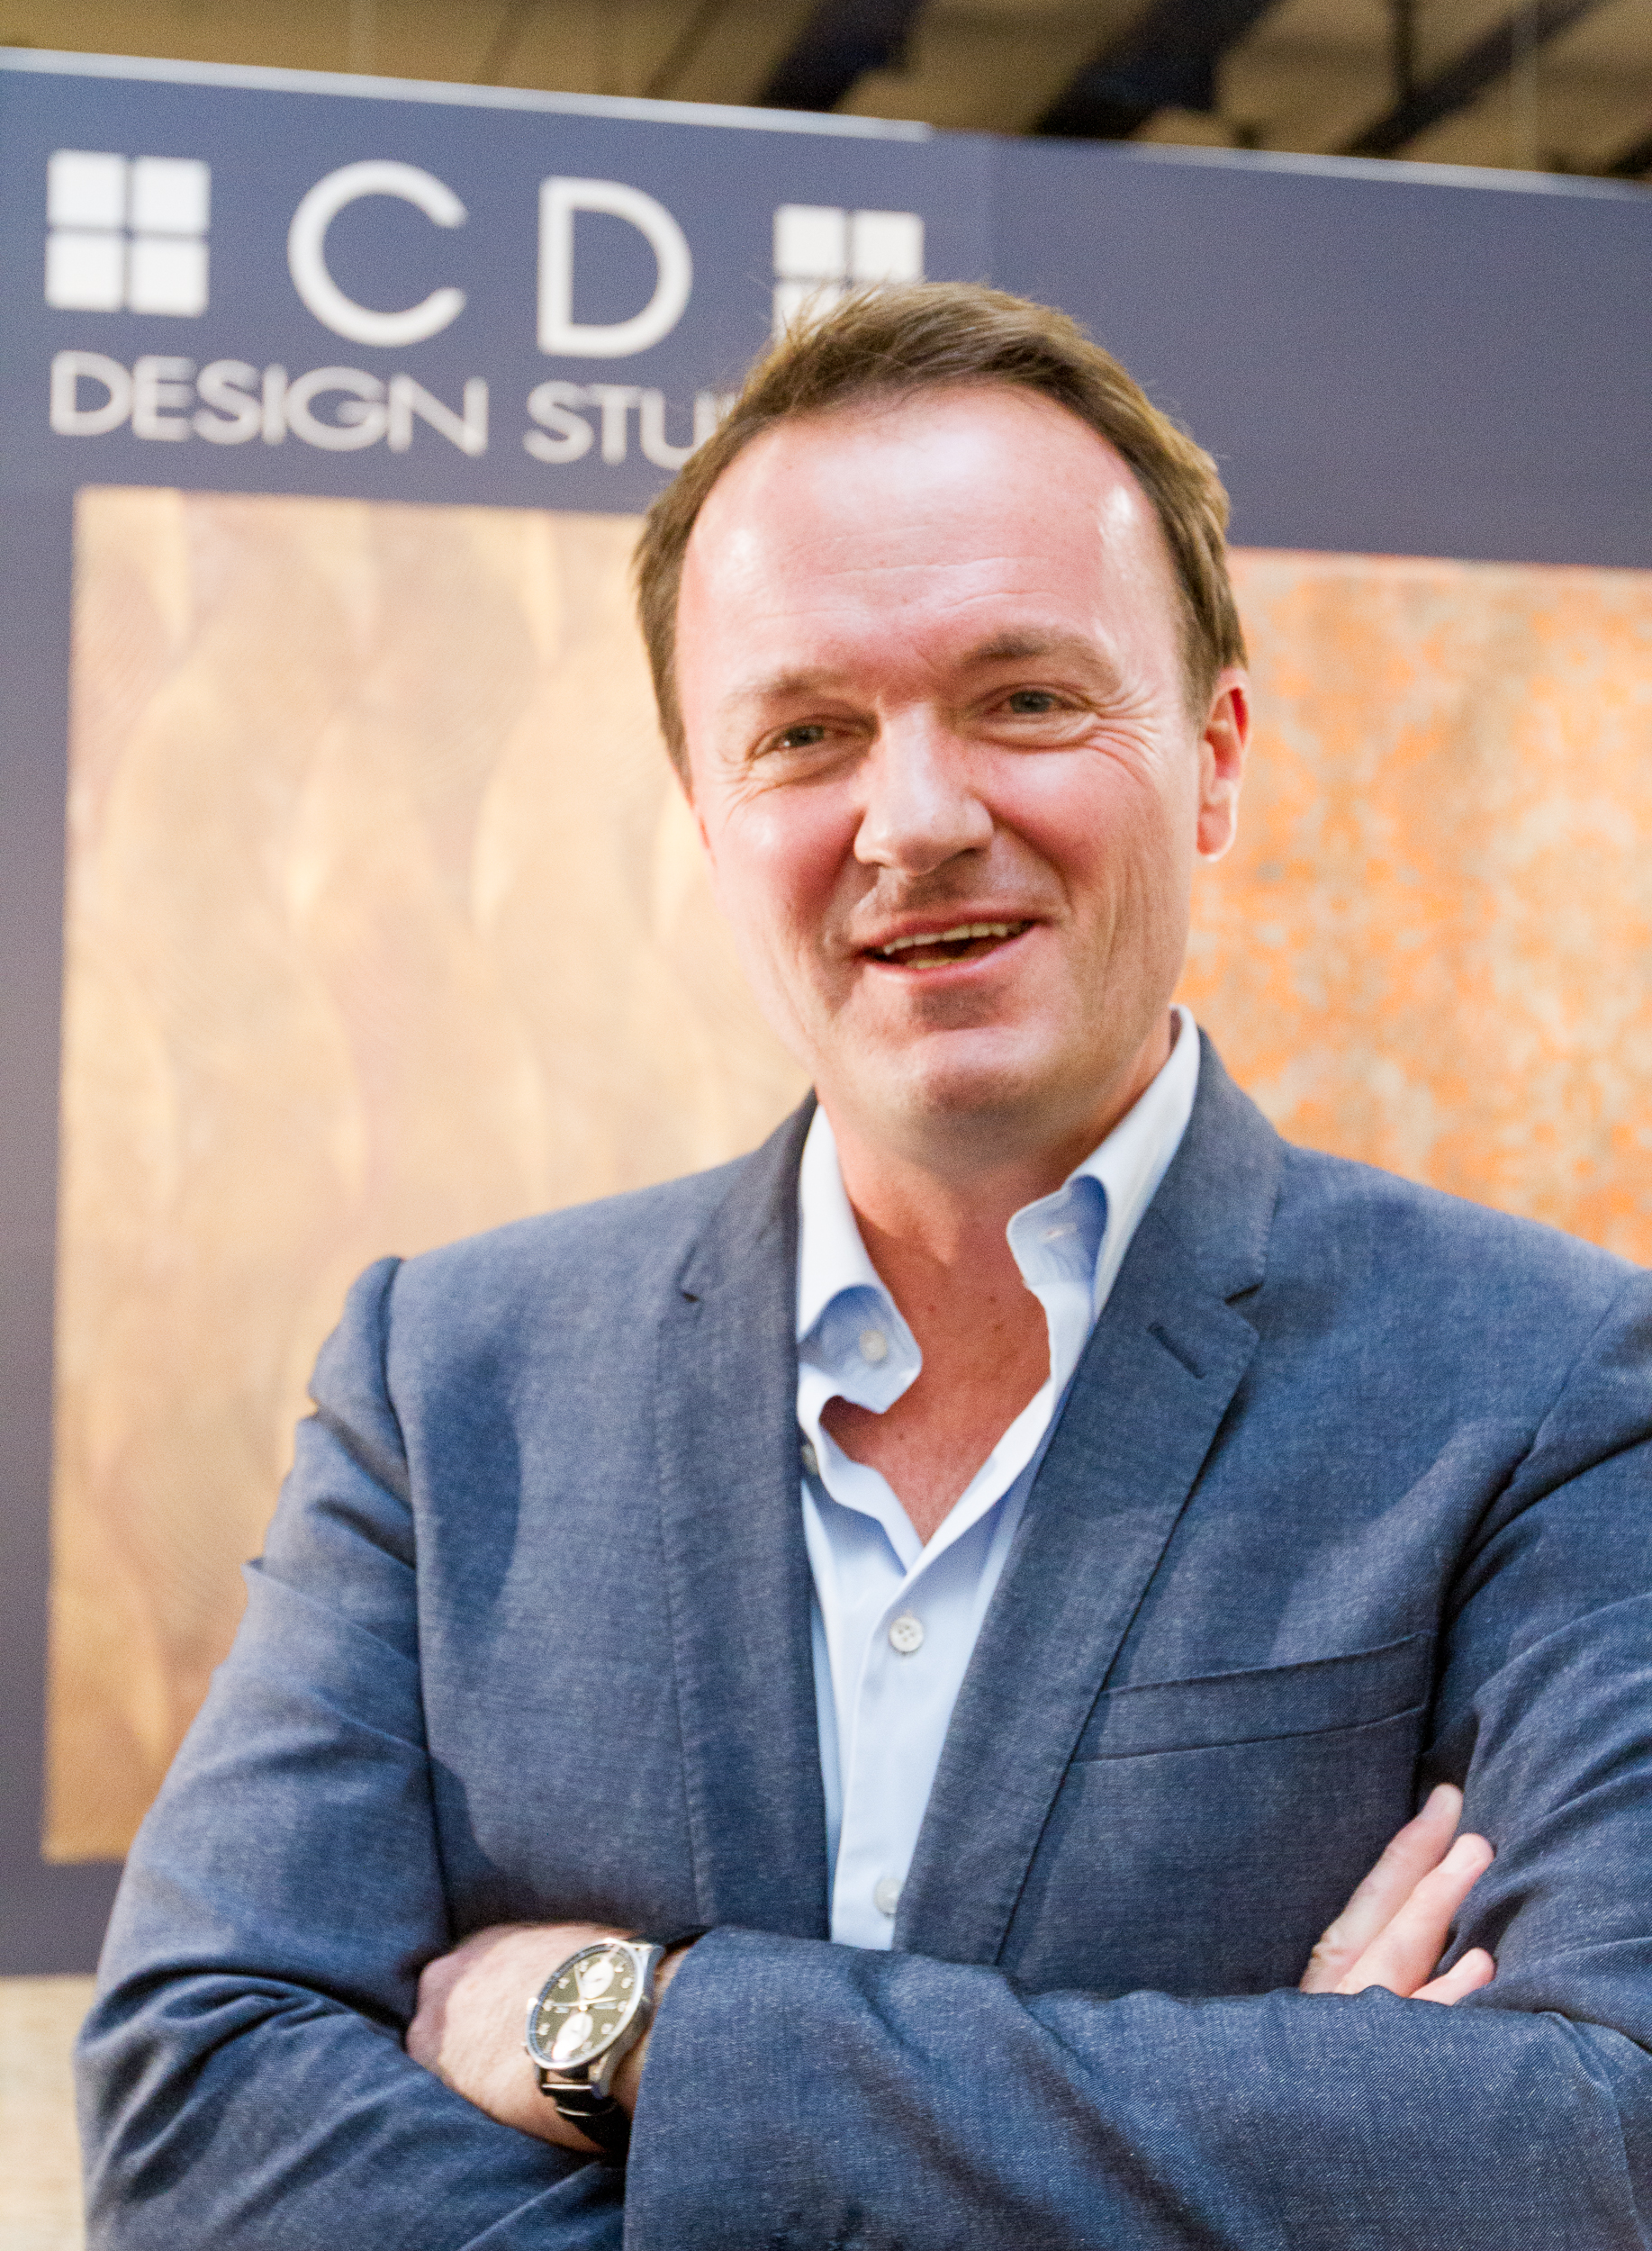  Designer Christian Dotzauer creates visuals for wall coverings, and shows his concepts every year at Heimtextil. His company, CD Design, also creates visuals for the flooring and laminates industry. 